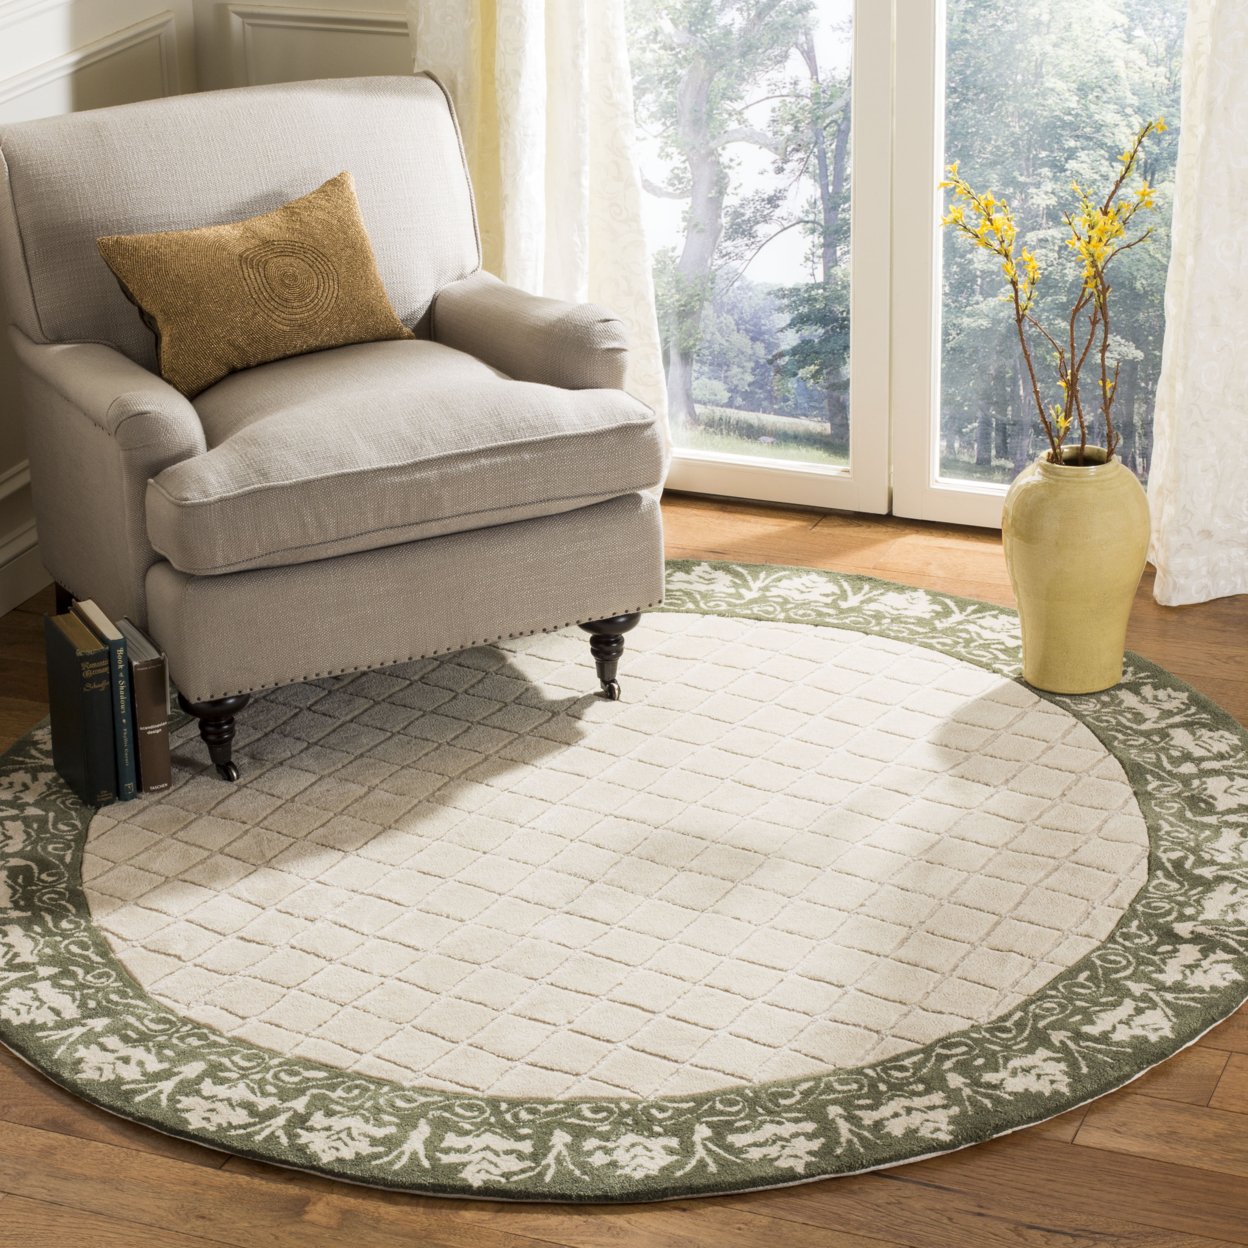 SAFAVIEH Total Performance TLP755A Ivory / Creme Rug - 6' Round